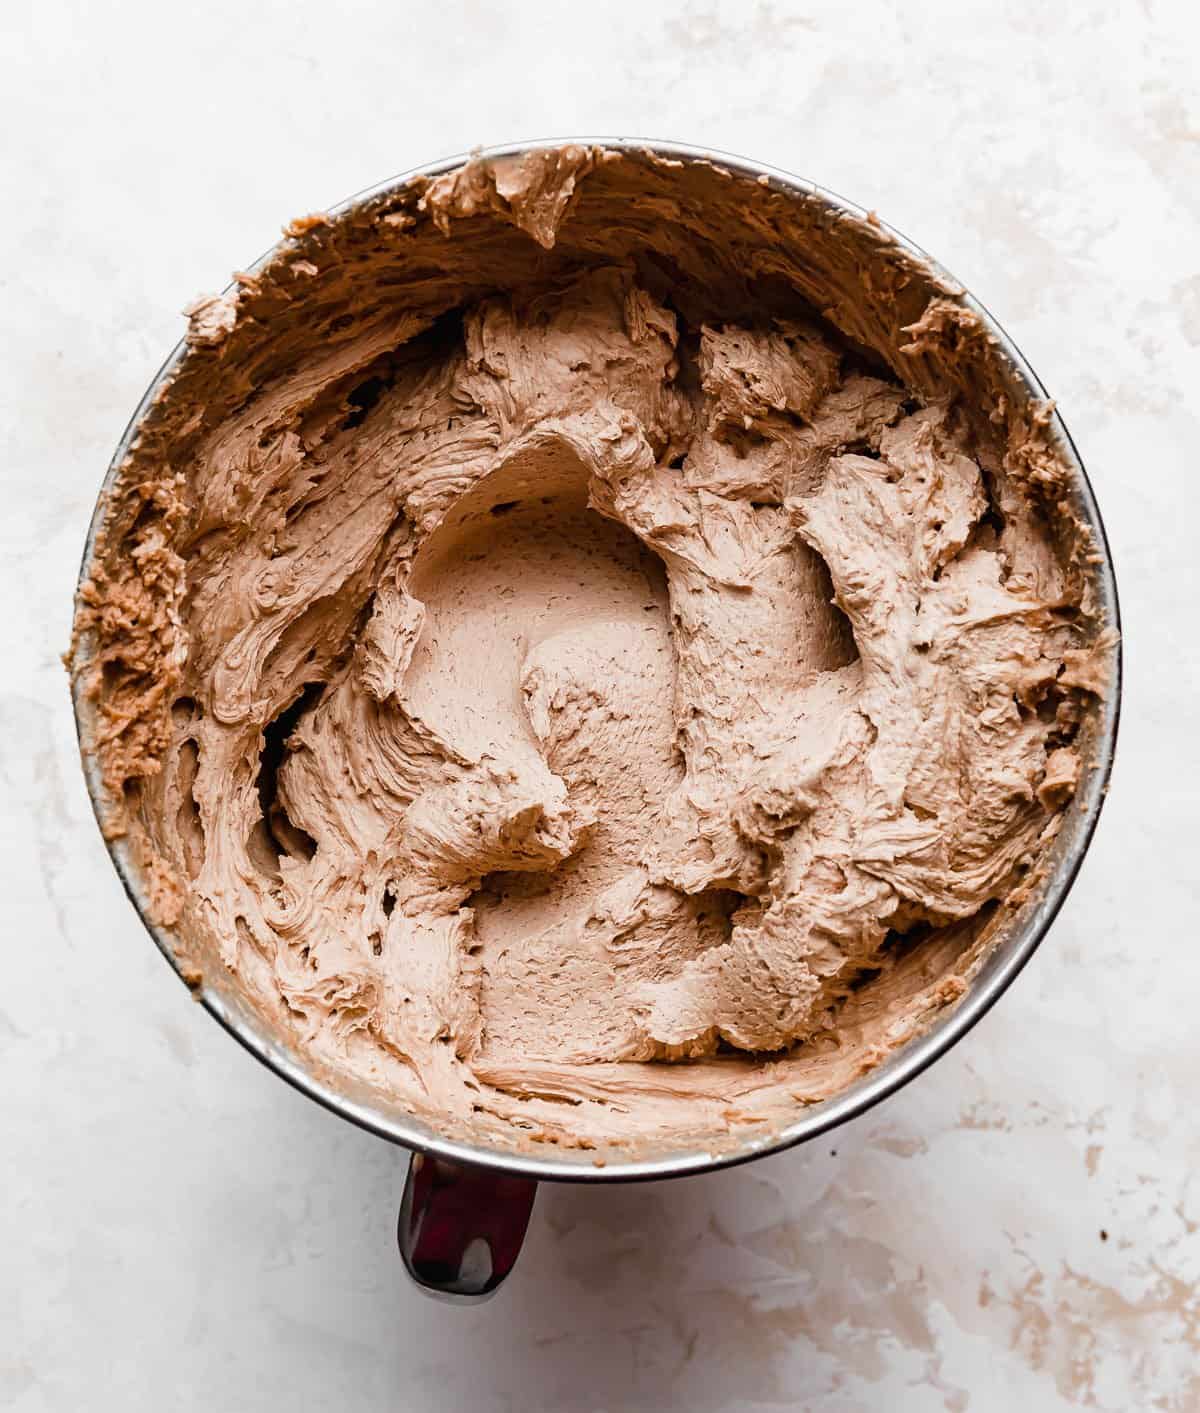 Chocolate buttercream frosting in a metal stand mixer bowl on a white background.